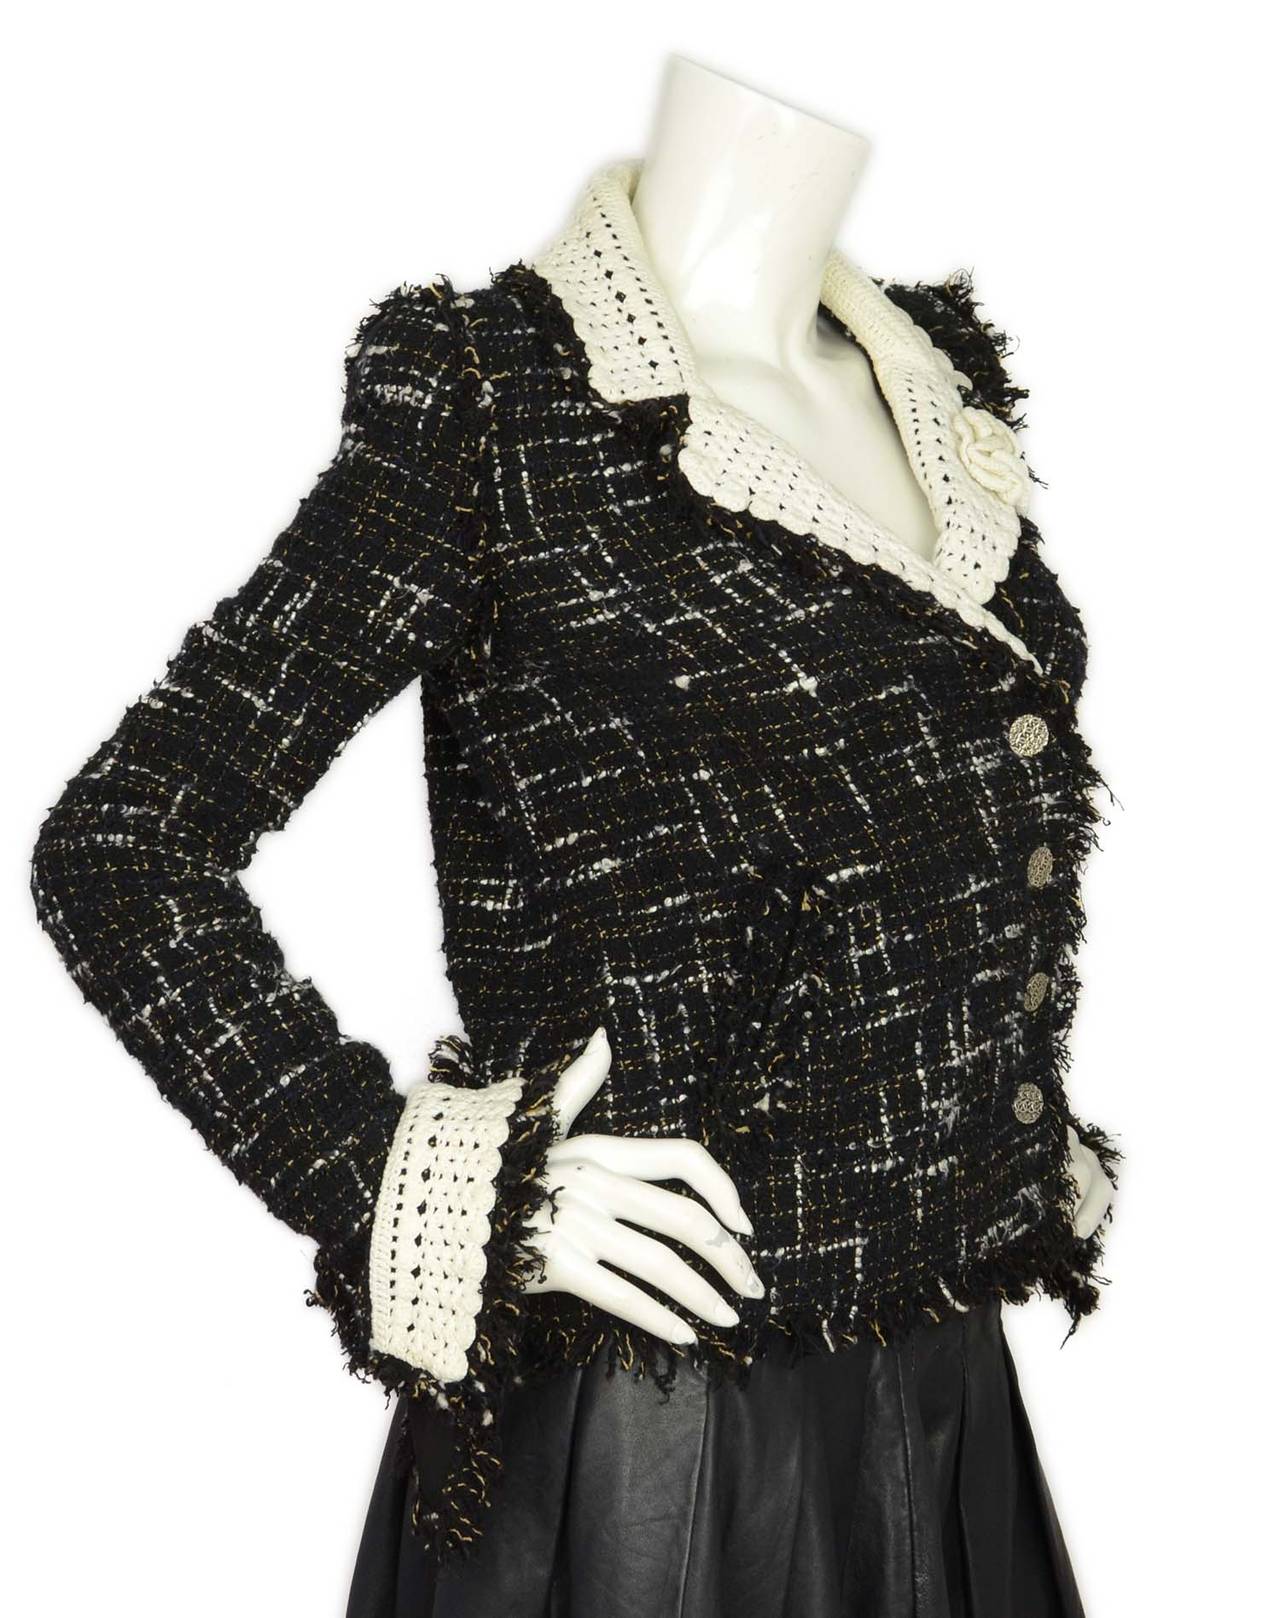 CHANEL Black and White Tweed Jacket W. White Crochet Trim

-Made in: Italy
-Year of Production: 2004
-Color: Black and White
-Composition: 73% Cotton, 16% Rayon, 10% Acrylic, 1% Polyester
-Tags: Brand and composition tags attached
-Lining: